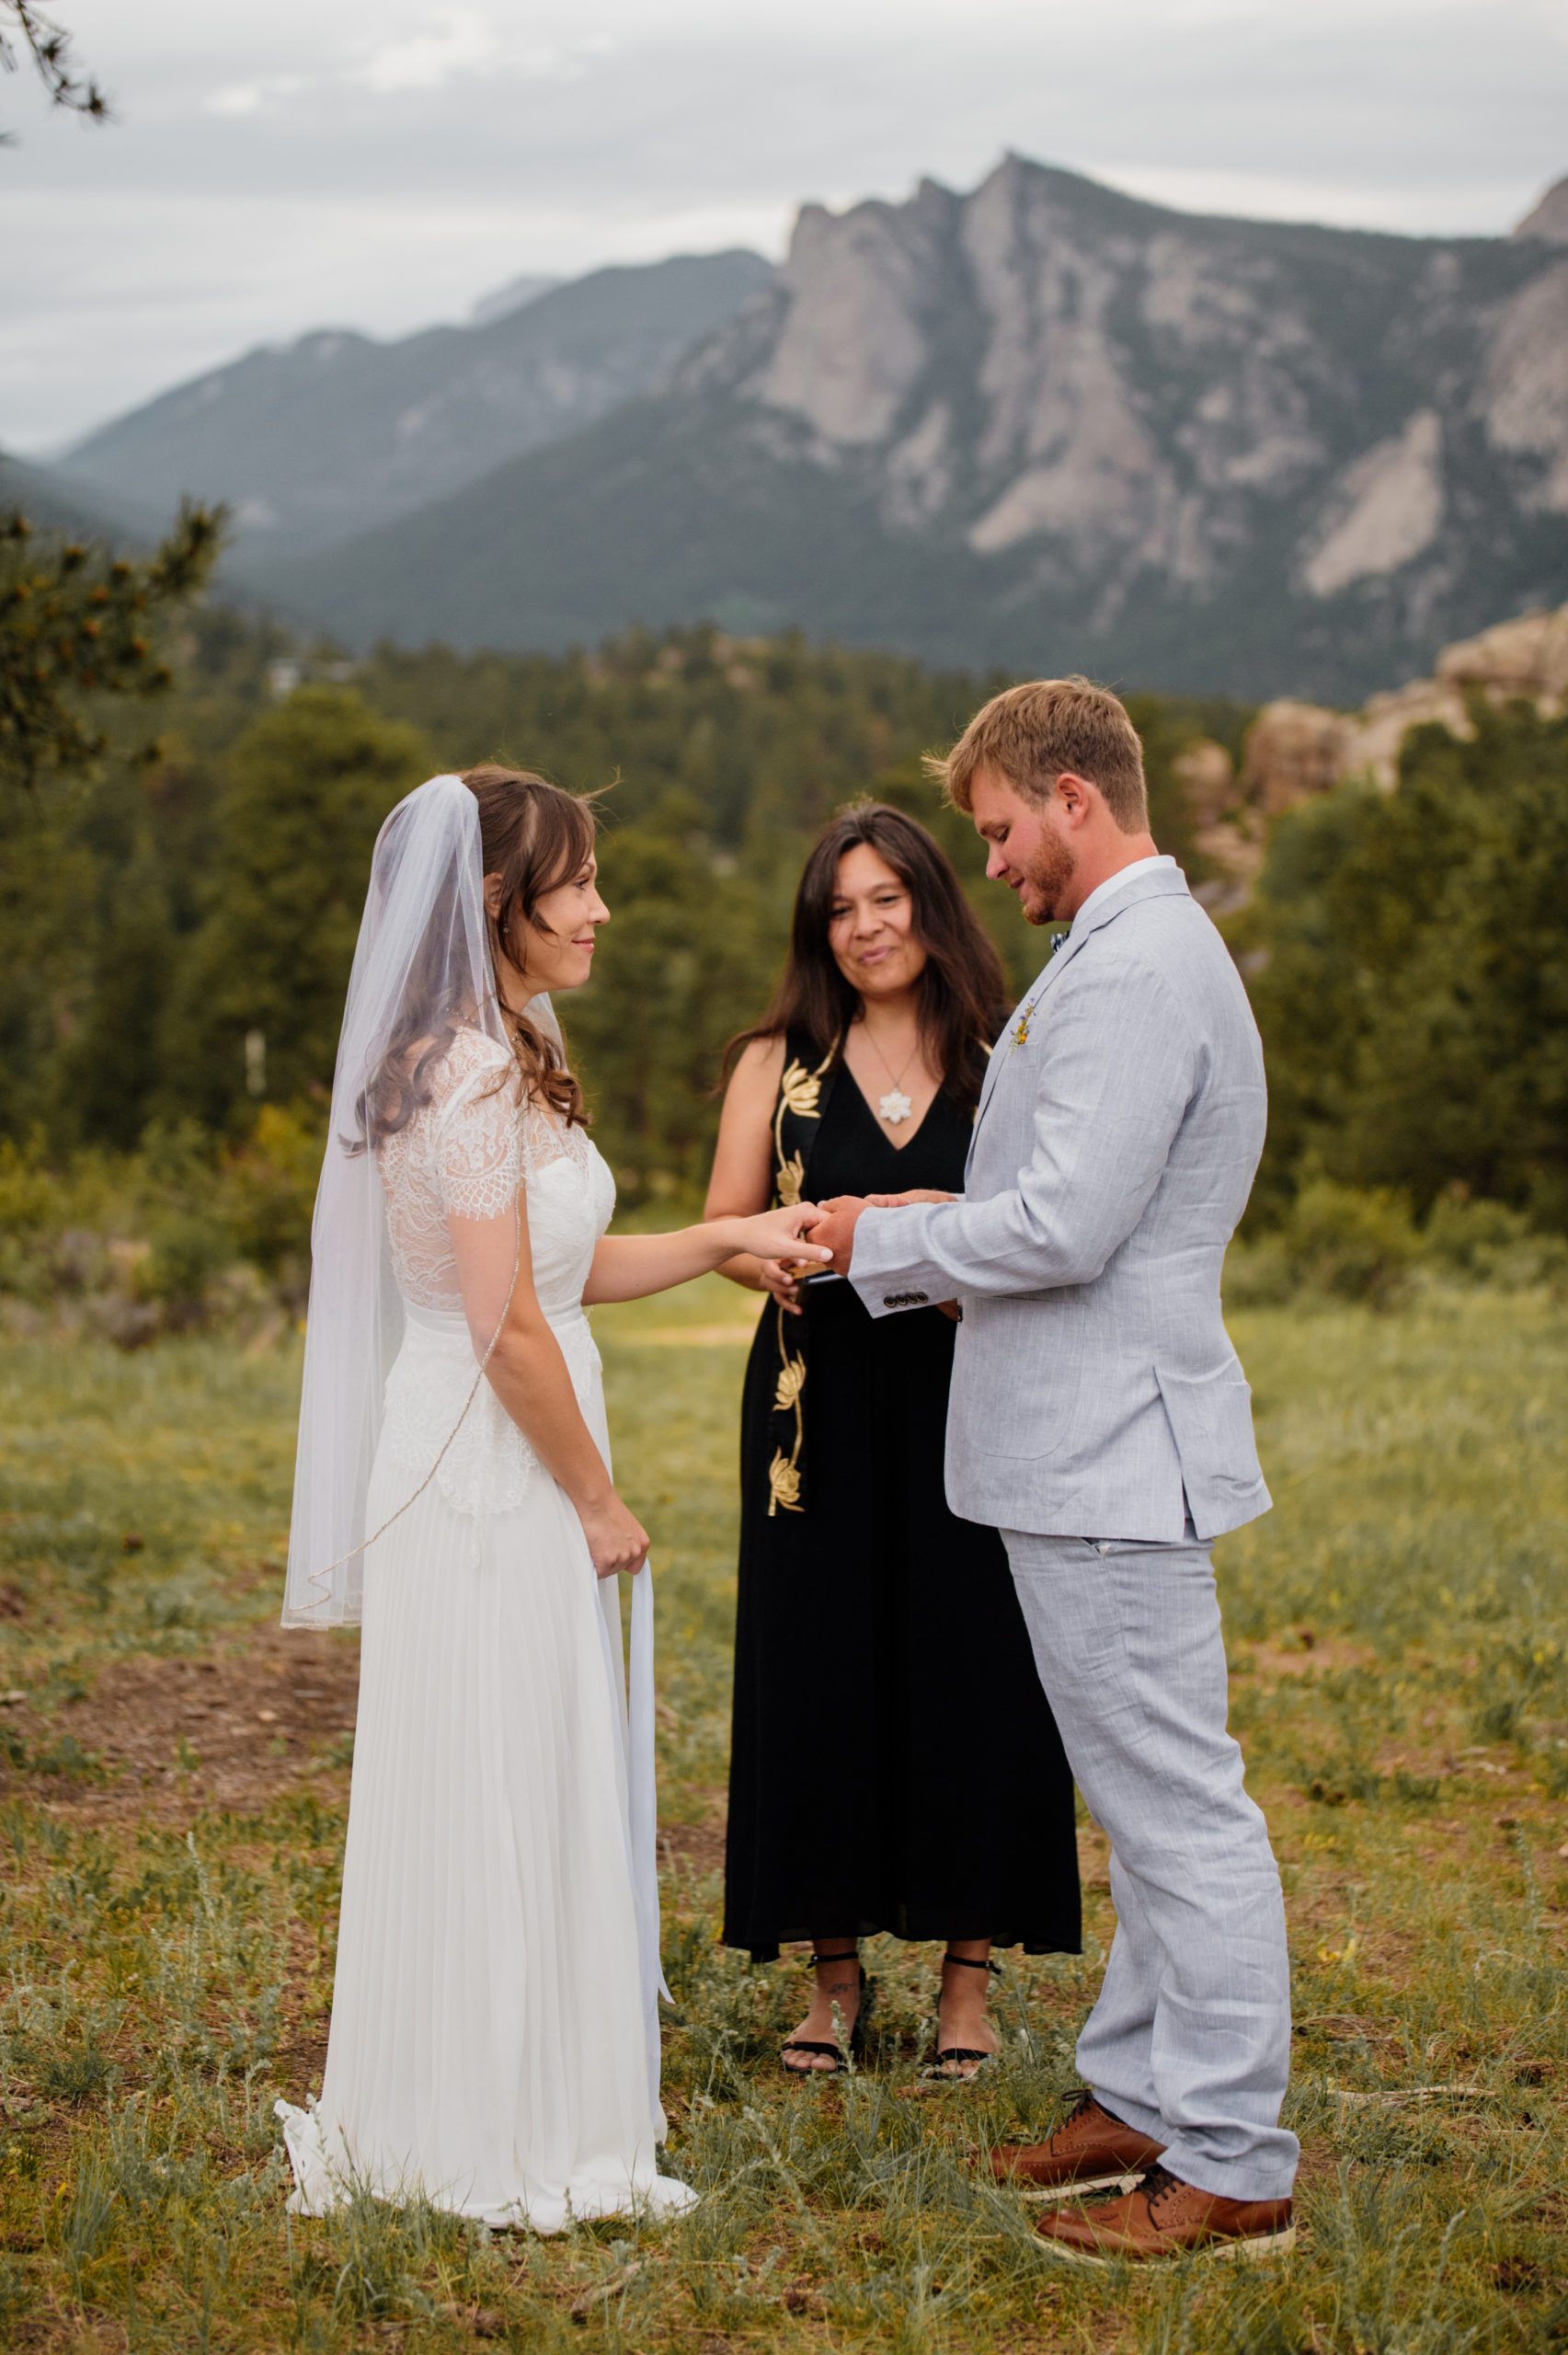 The groom places the ring on his wife's hand during their elopement ceremony at Knoll Willows in Estes Park.